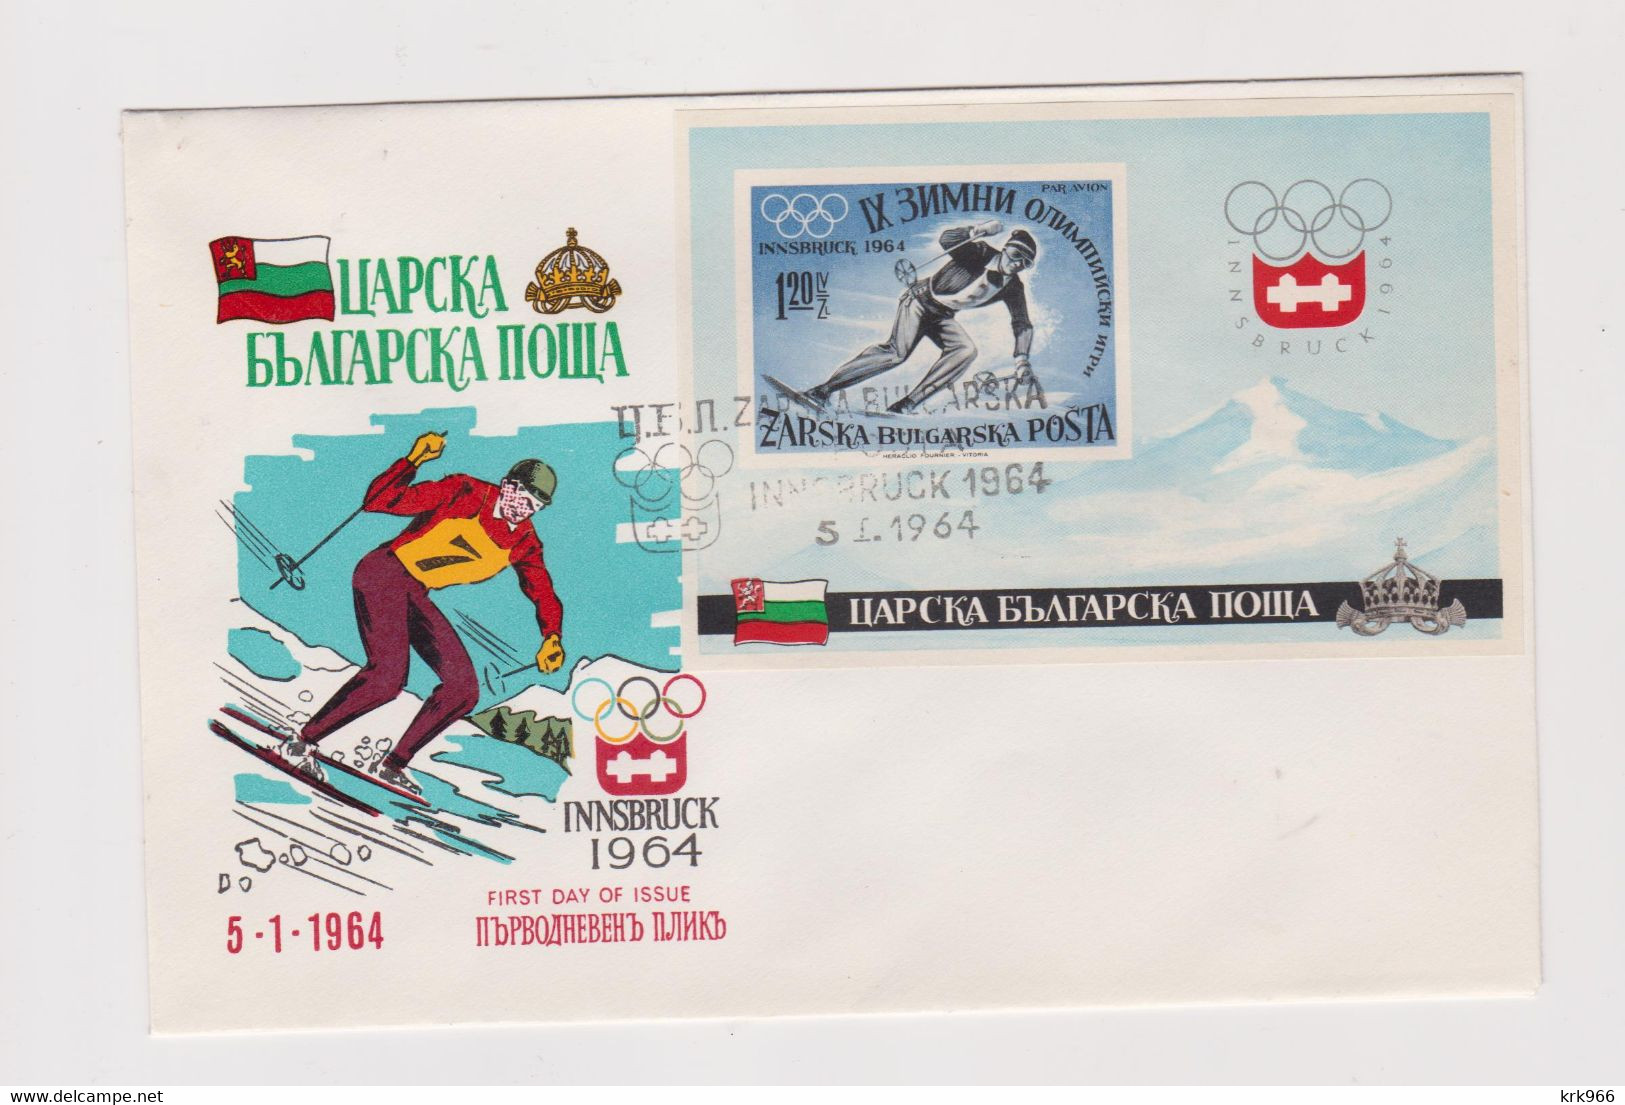 BULGARIA 1964 EXILE OLYMPIC GAMES Imperforated Sheet FDC Cover - Covers & Documents